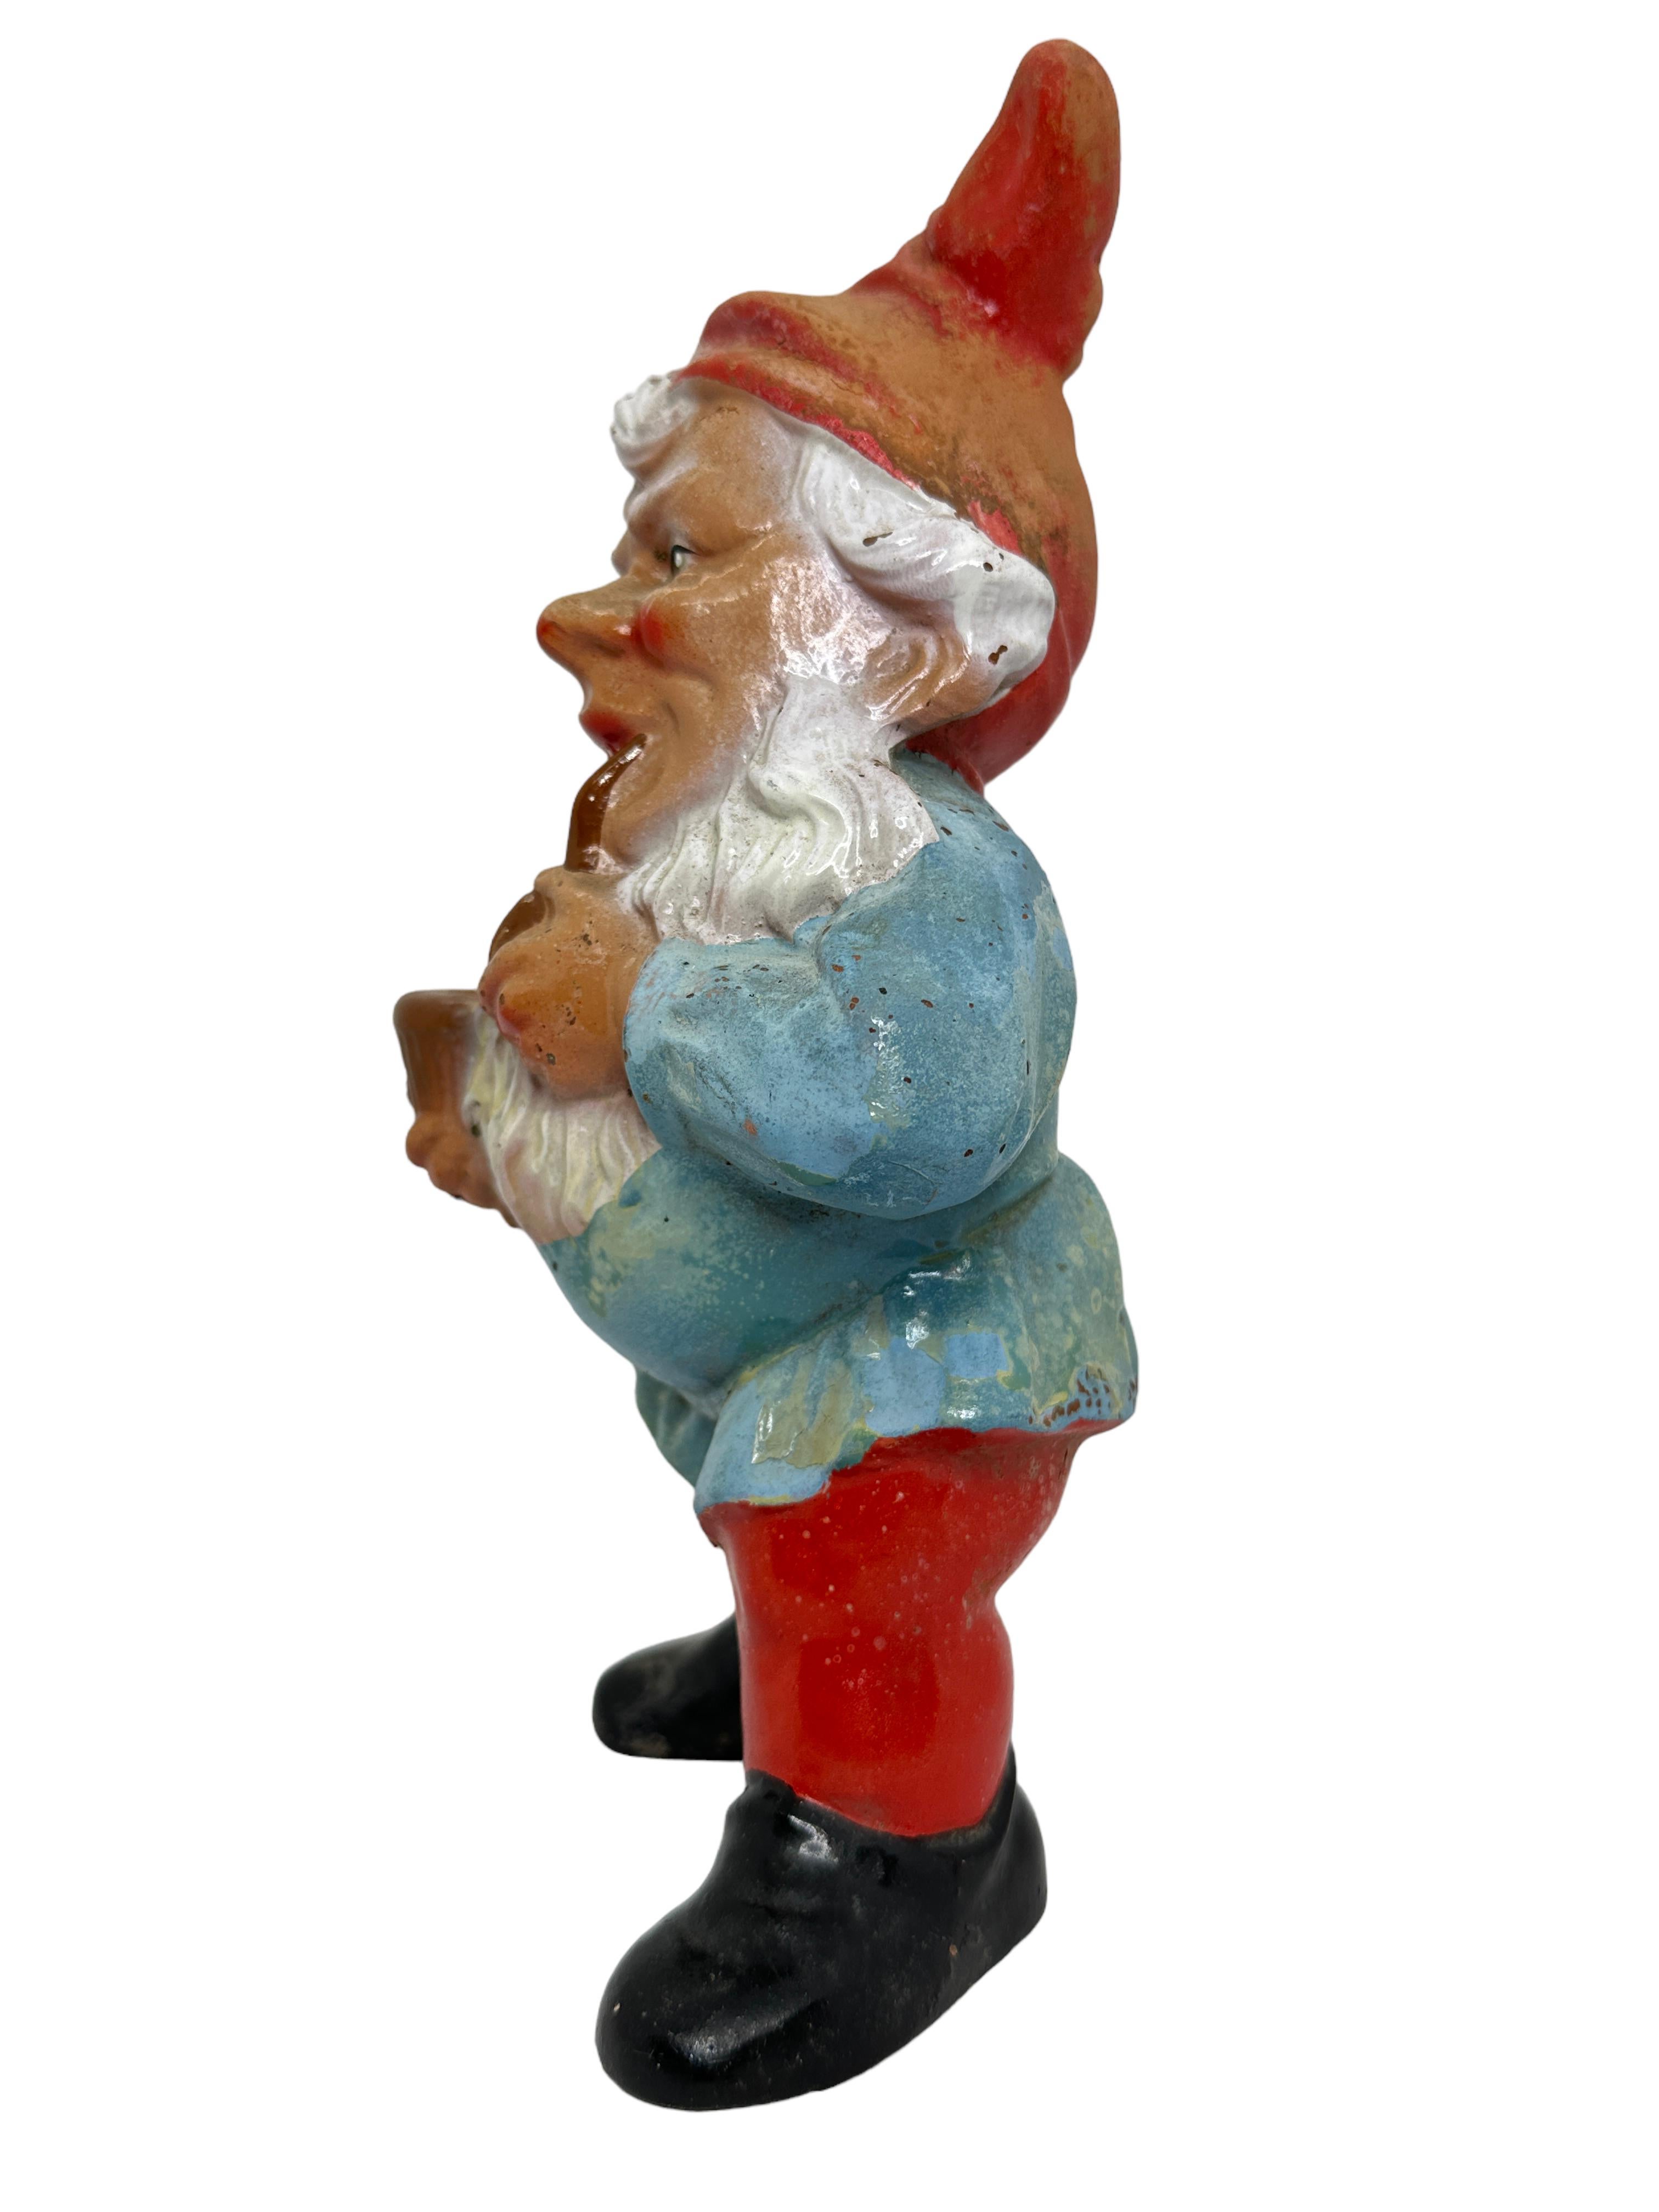 A gorgeous character ceramic figural gnome statue - attributed to Griebel Germany, a well known manufacturer of this kind of figures. This character statue has been made in Germany, in the 1930s or older. Absolutely gorgeous item with lots of